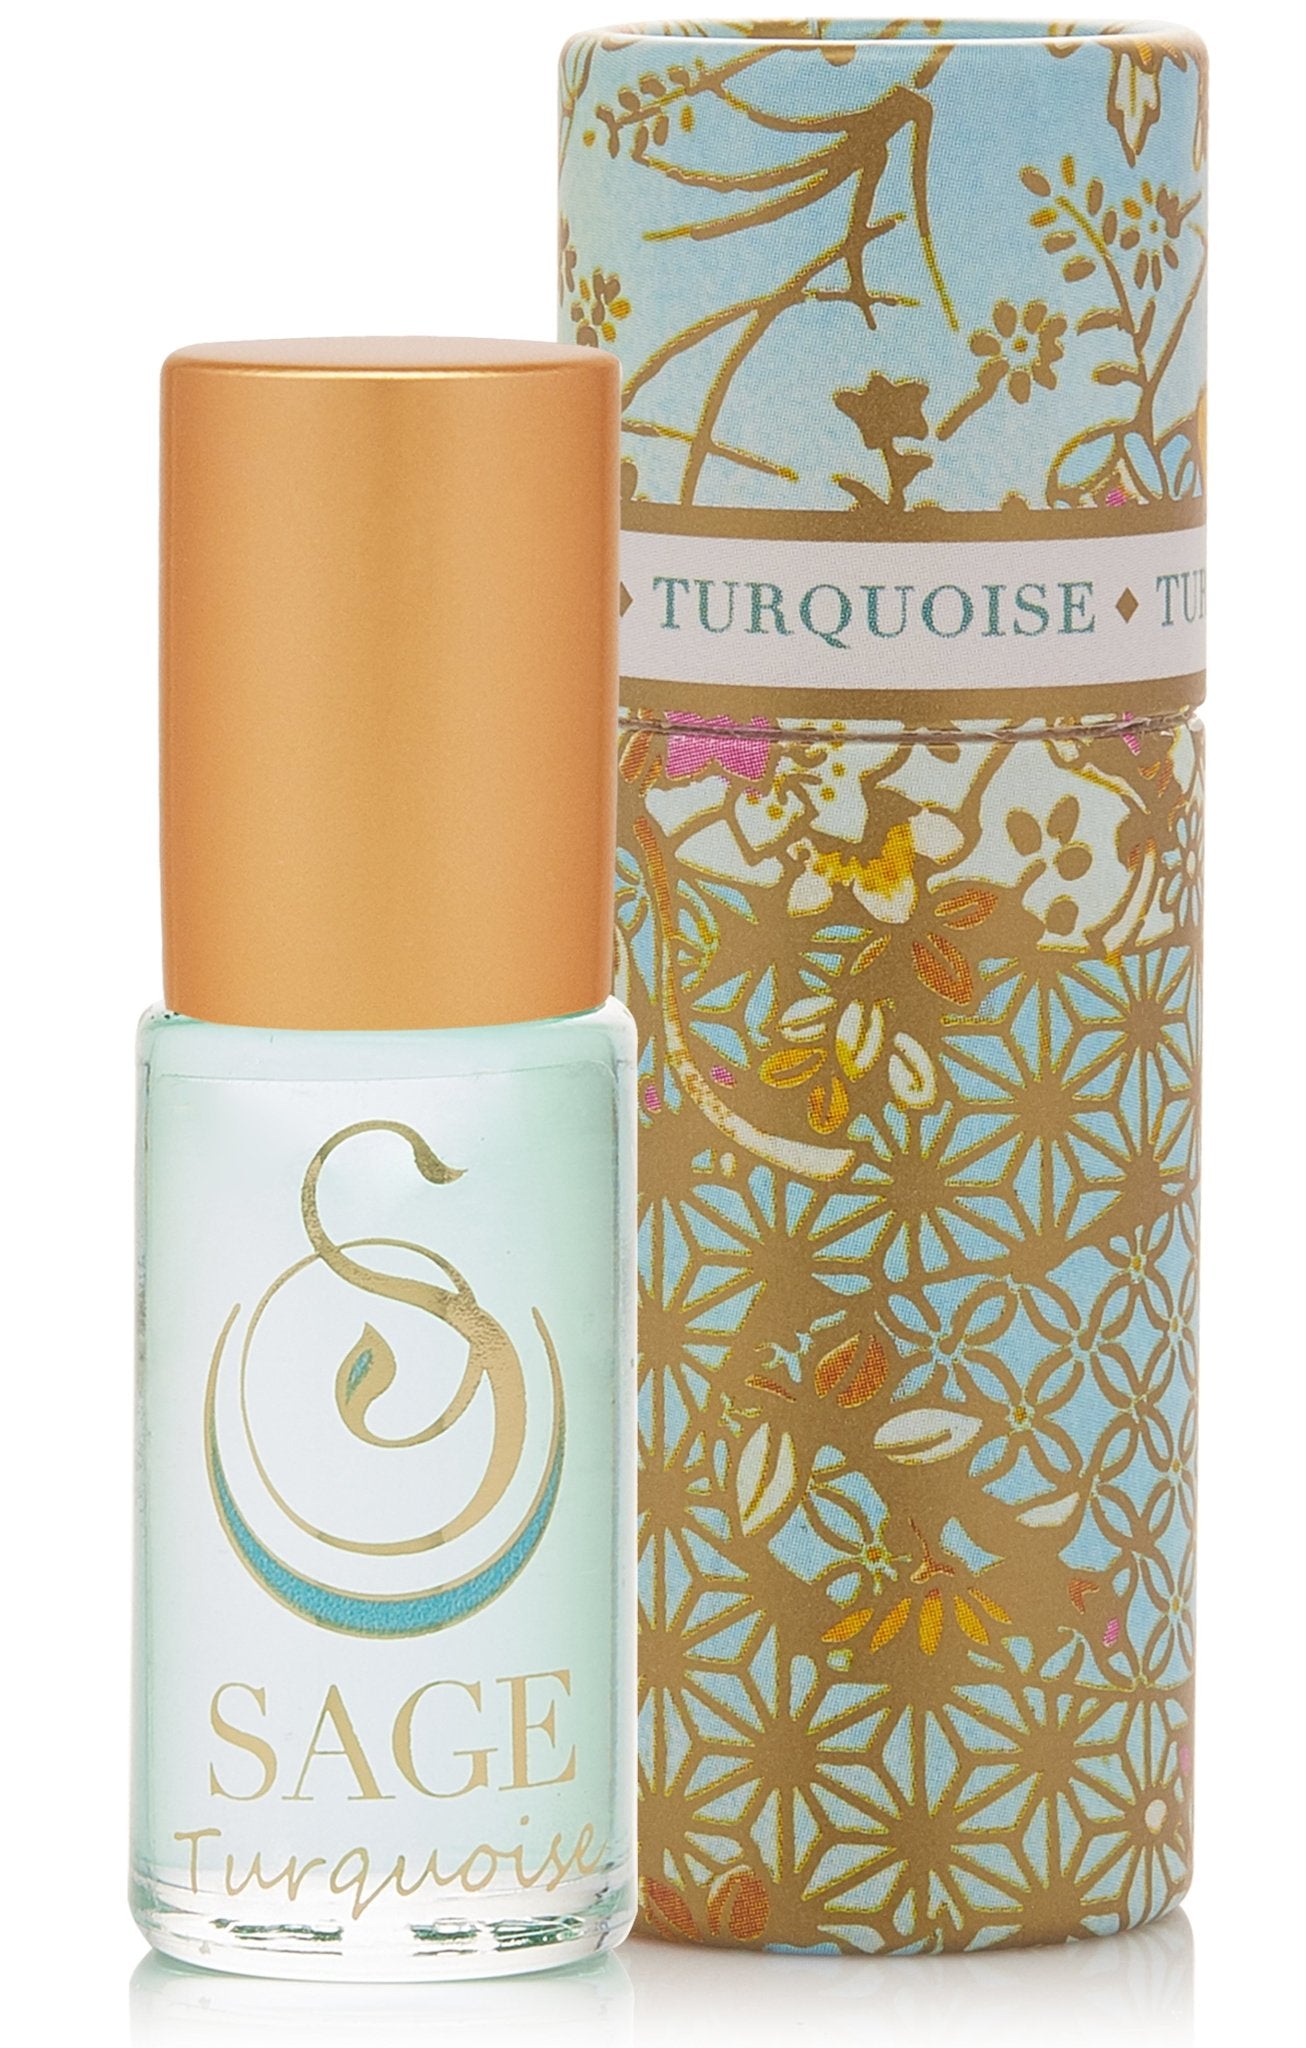 Turquoise Gemstone Perfume Oil Roll-On by Sage - The Sage Lifestyle